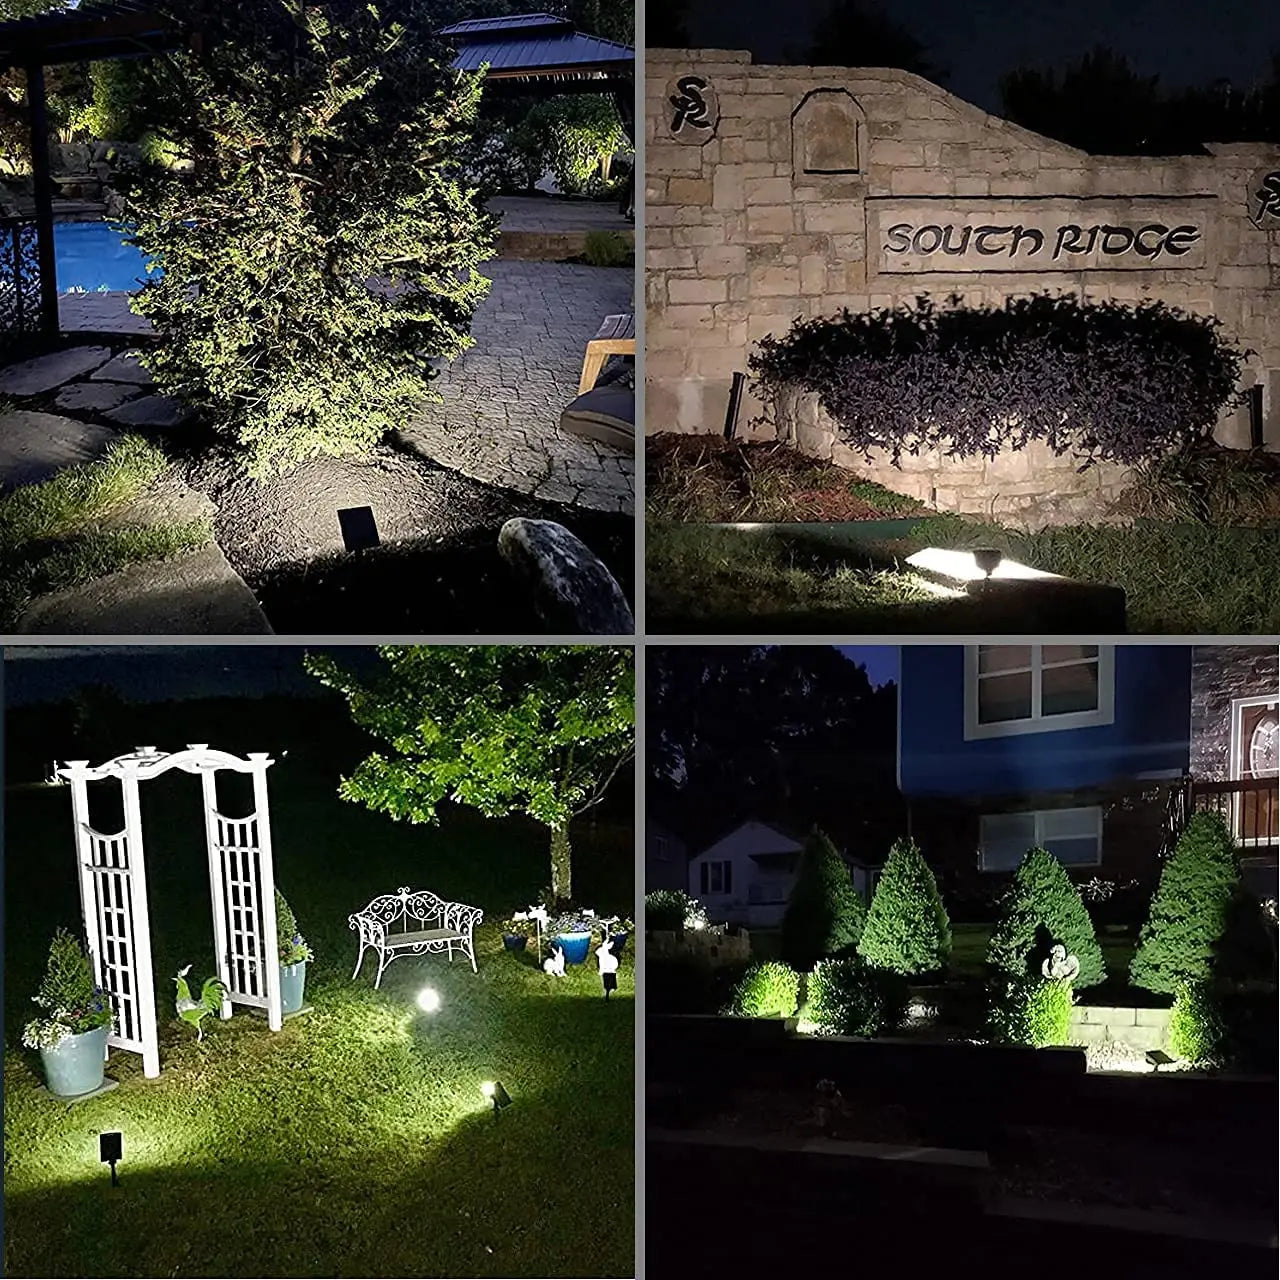 48 LEDs Solar Light, Press once for low light mode: continuous lighting for up to 20 hours.